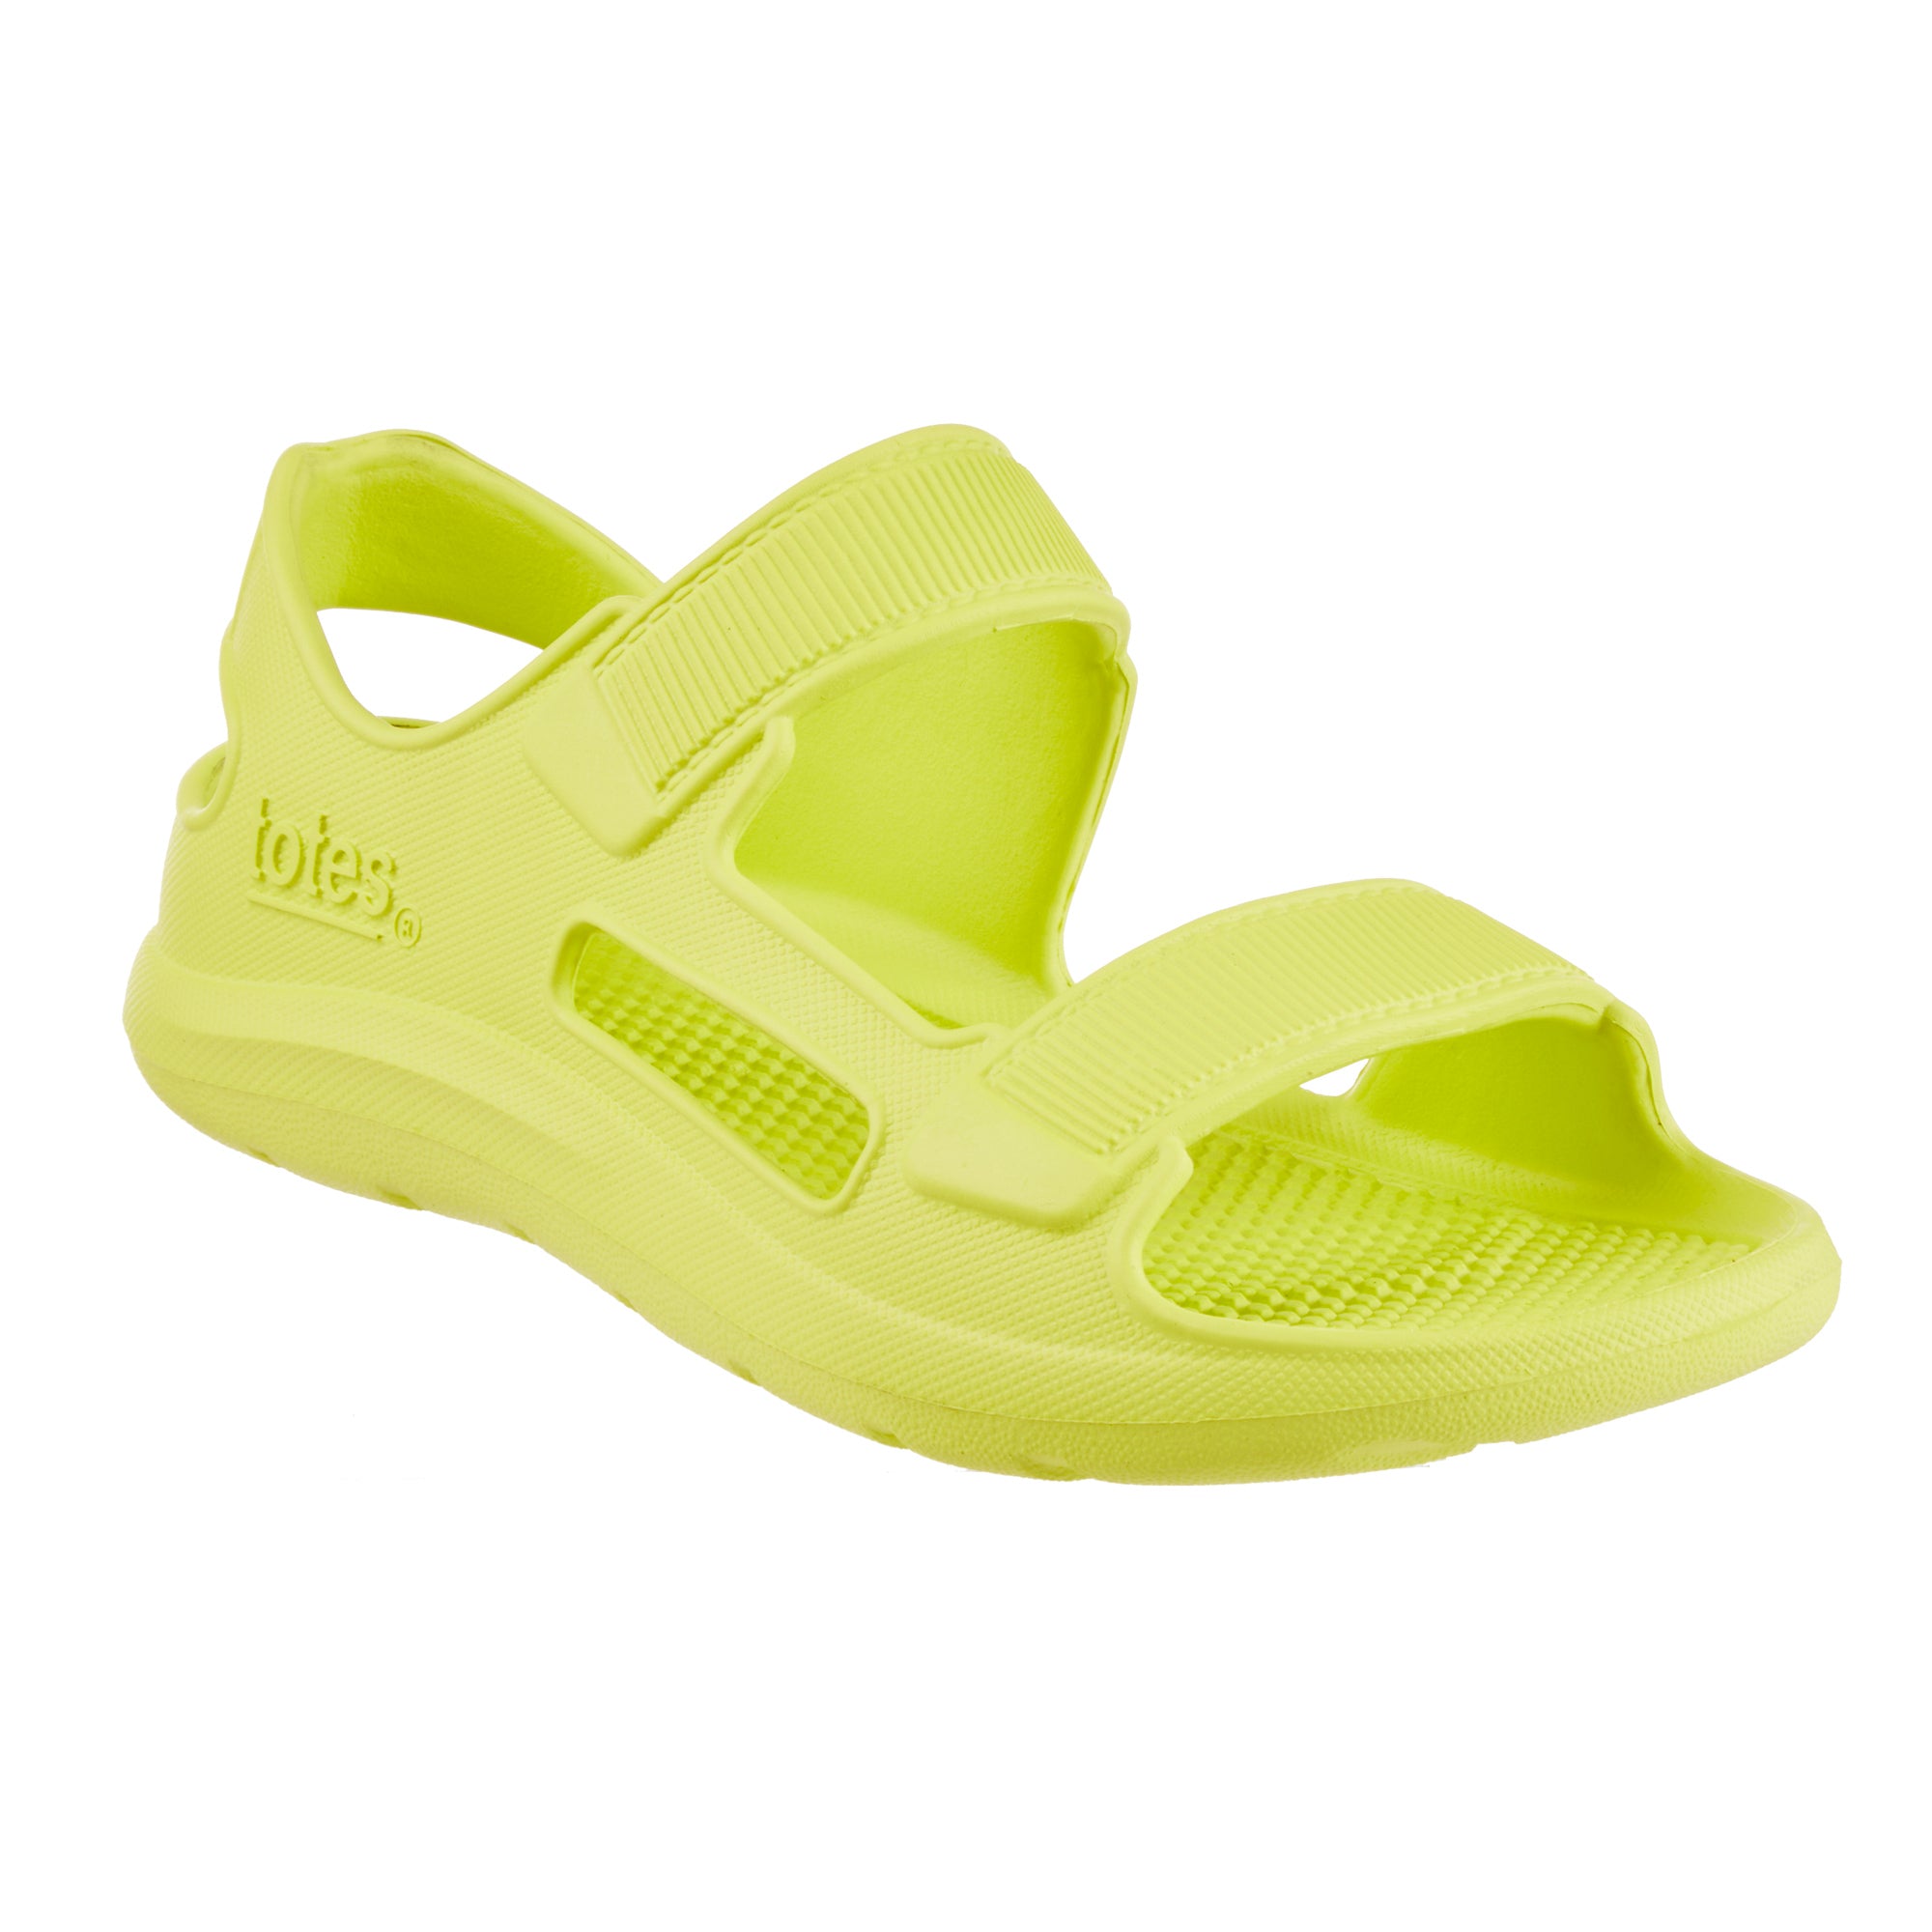 Totes Sandals Are the BEST Kids Shoes for Summer (+ Score 20% Off)!